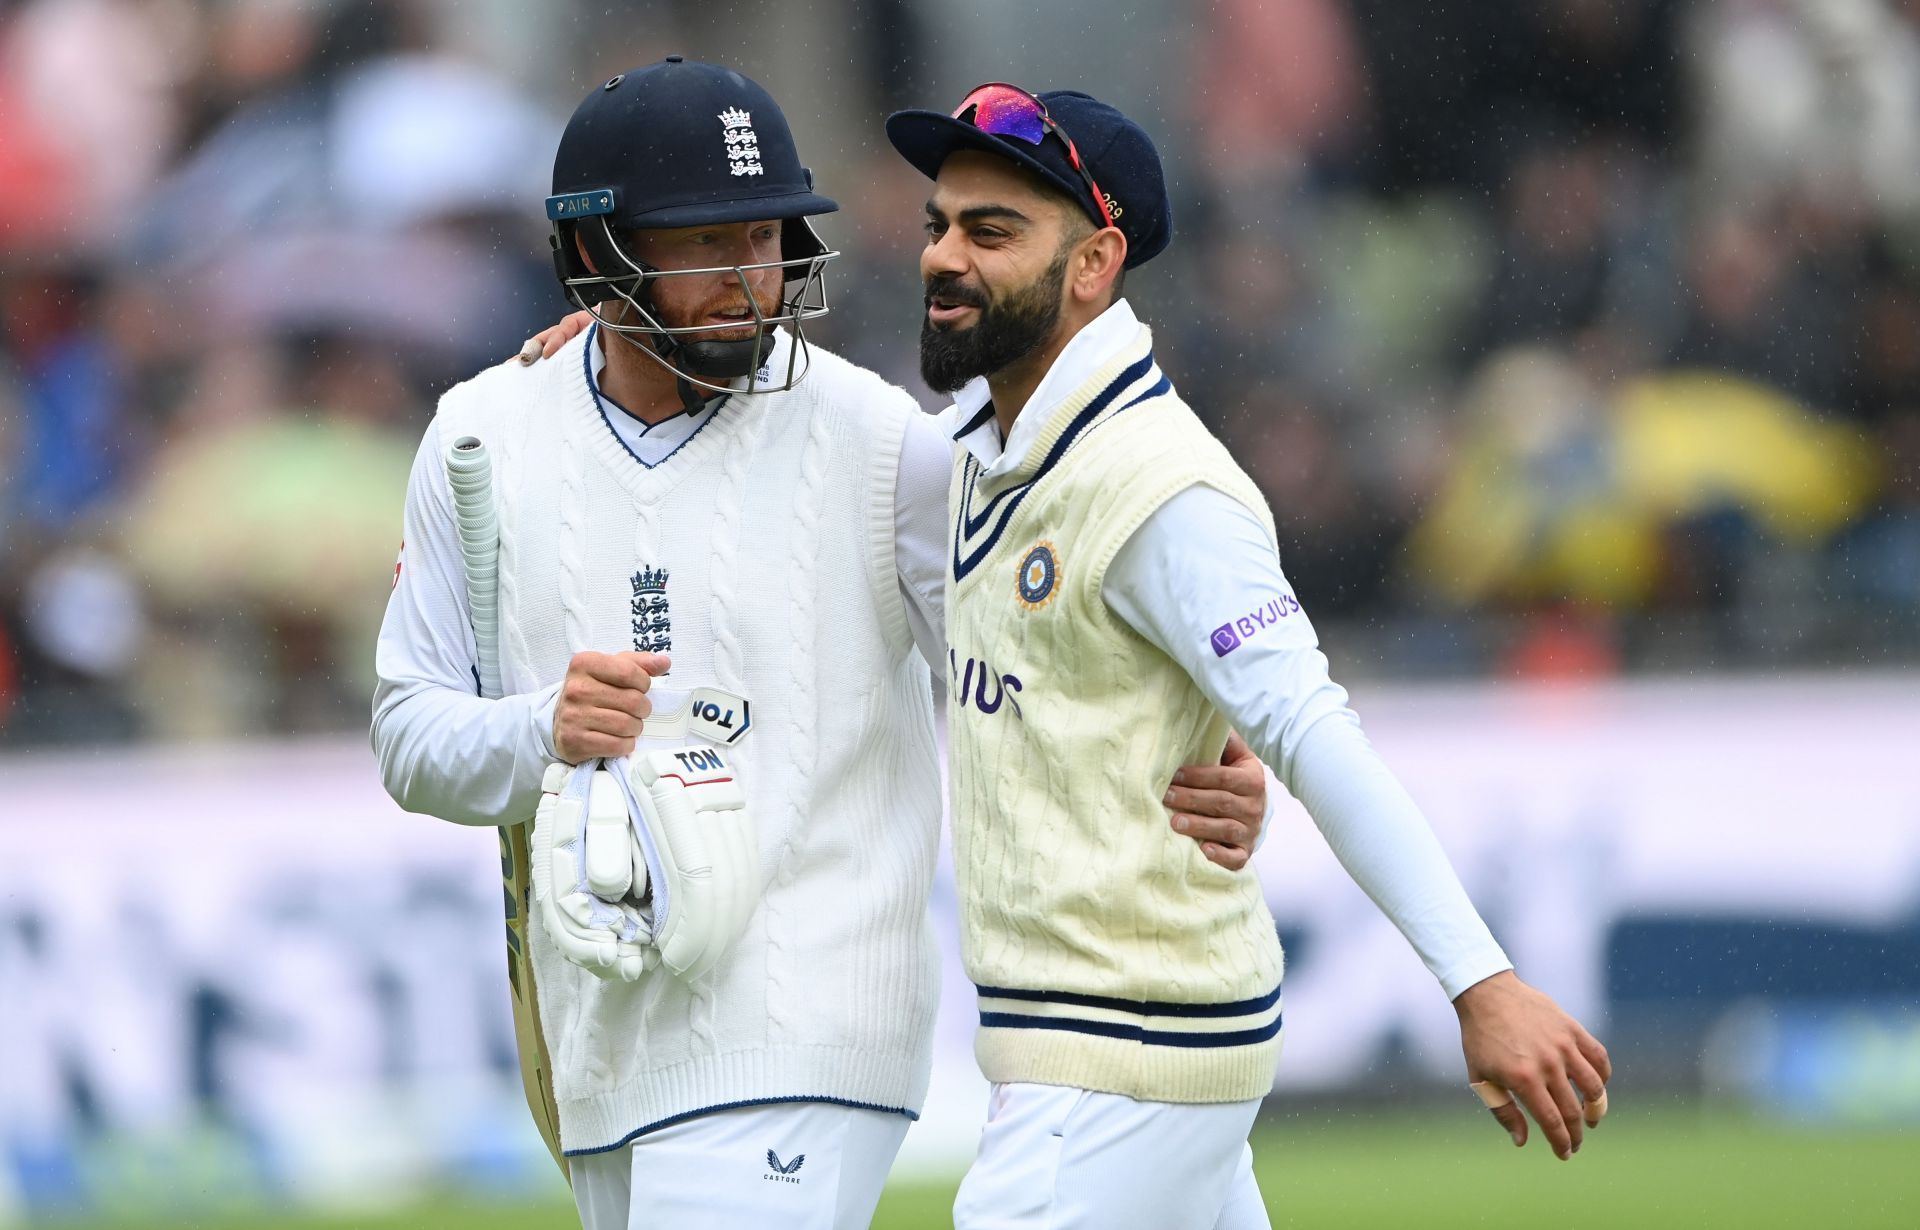 Jonny Bairstow and Virat Kohli had a war of words during the India vs England Test match in Birmingham